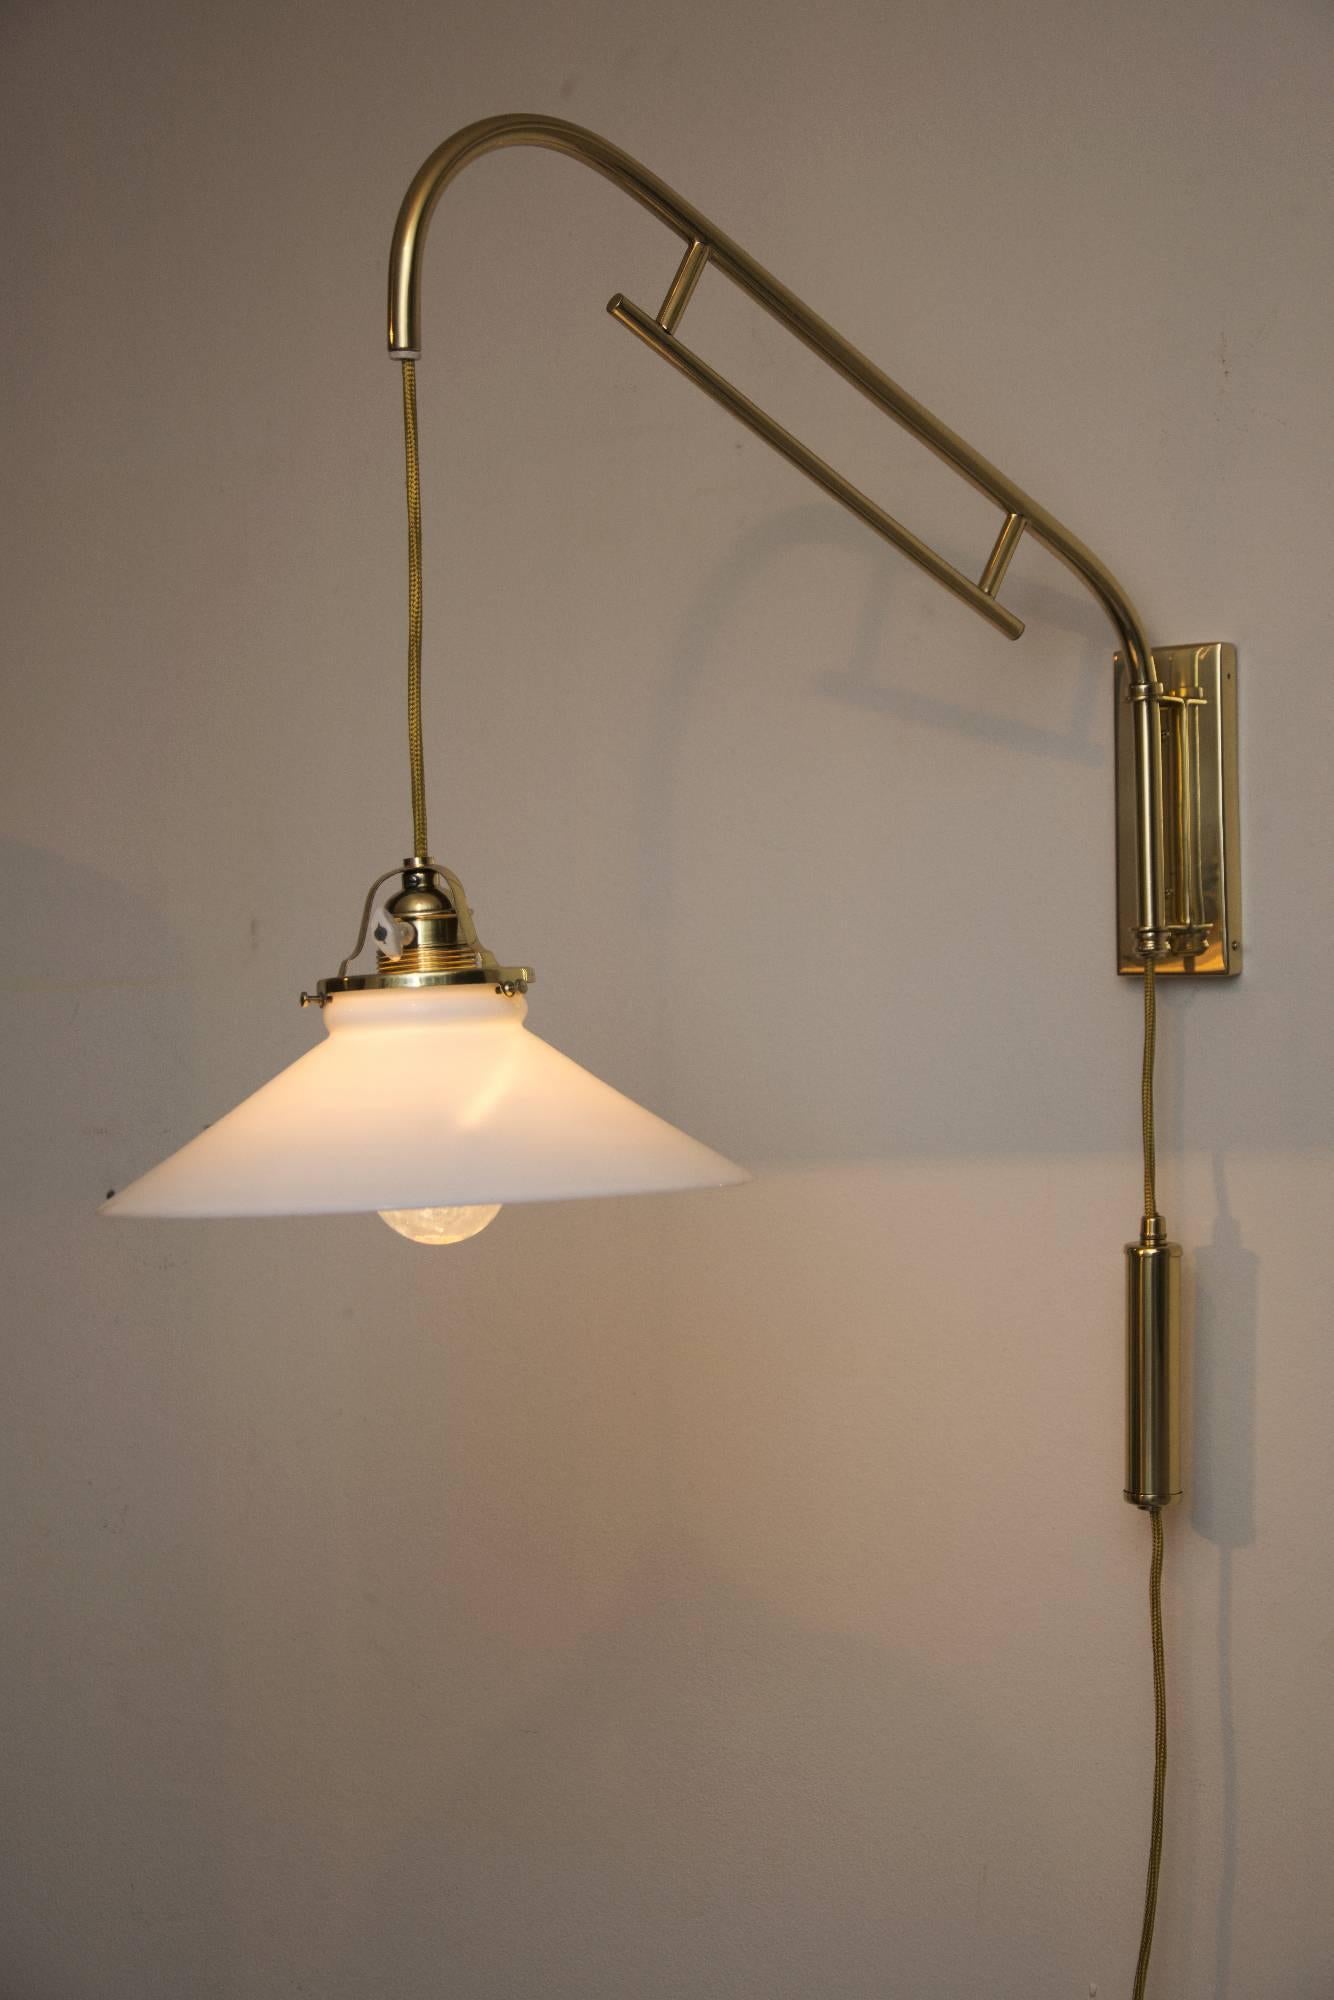 Adjustable wall lamp with opal glass shade
polished and stove enameled.